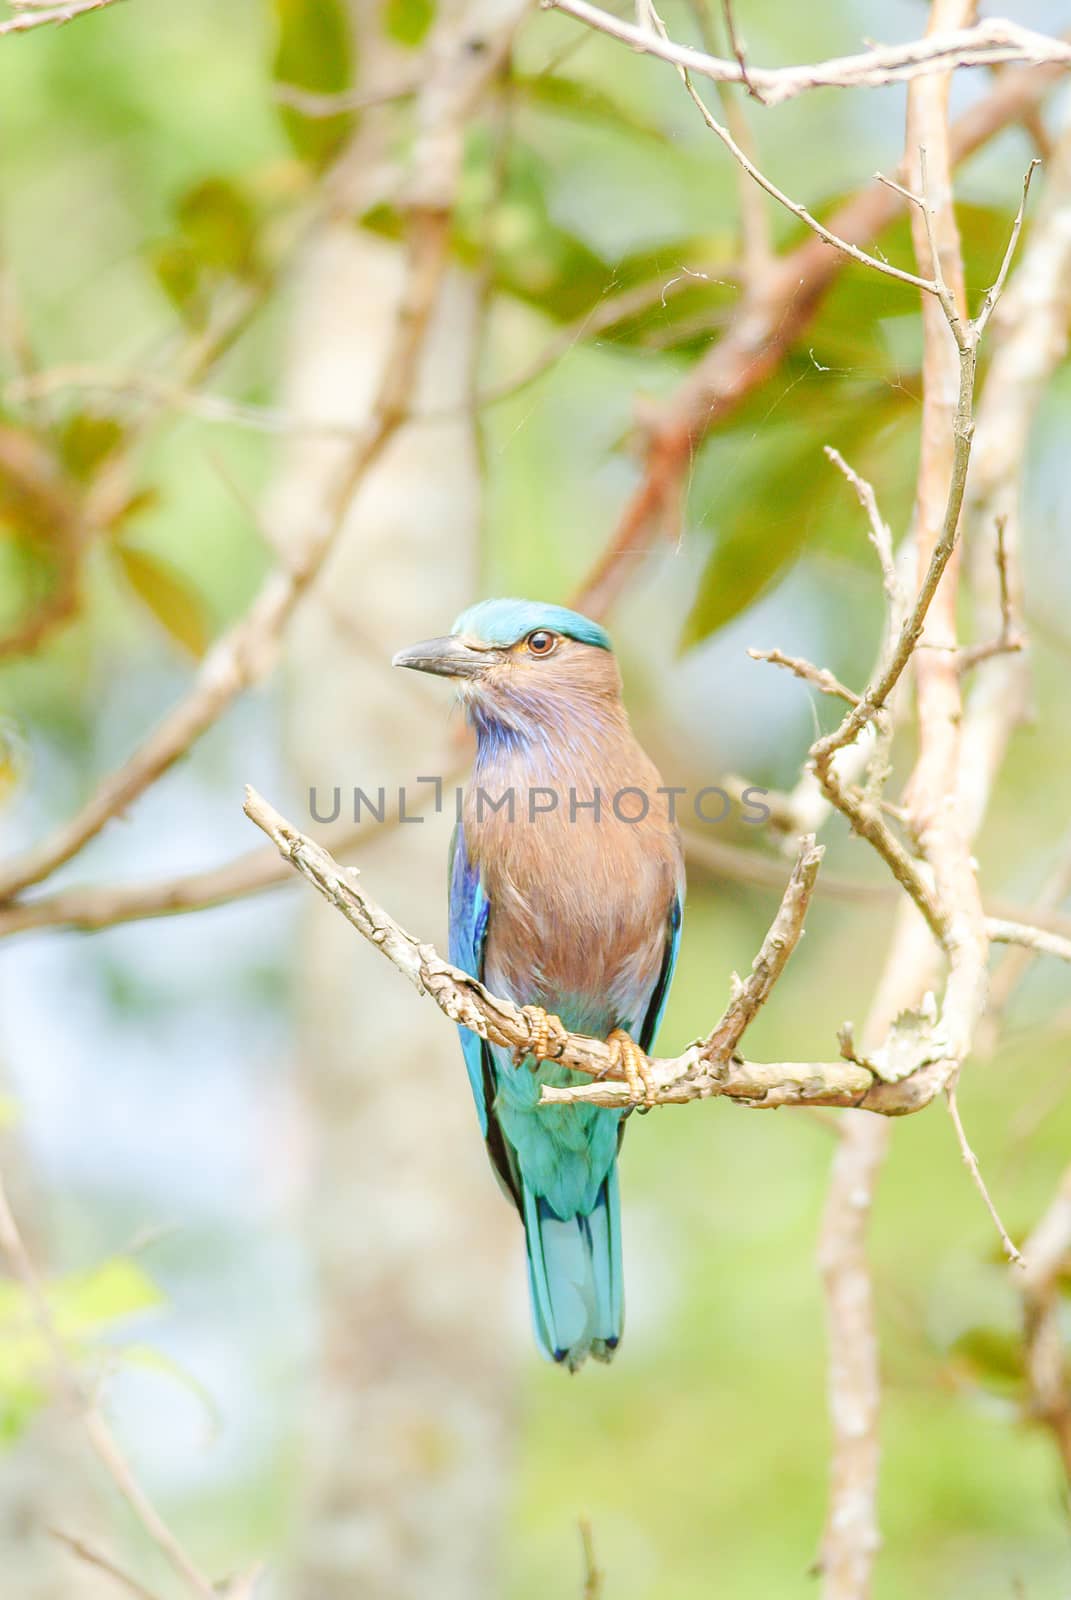 Indian Roller (Coracias benghalensis) on the branch. They are found widely across tropical Asia
